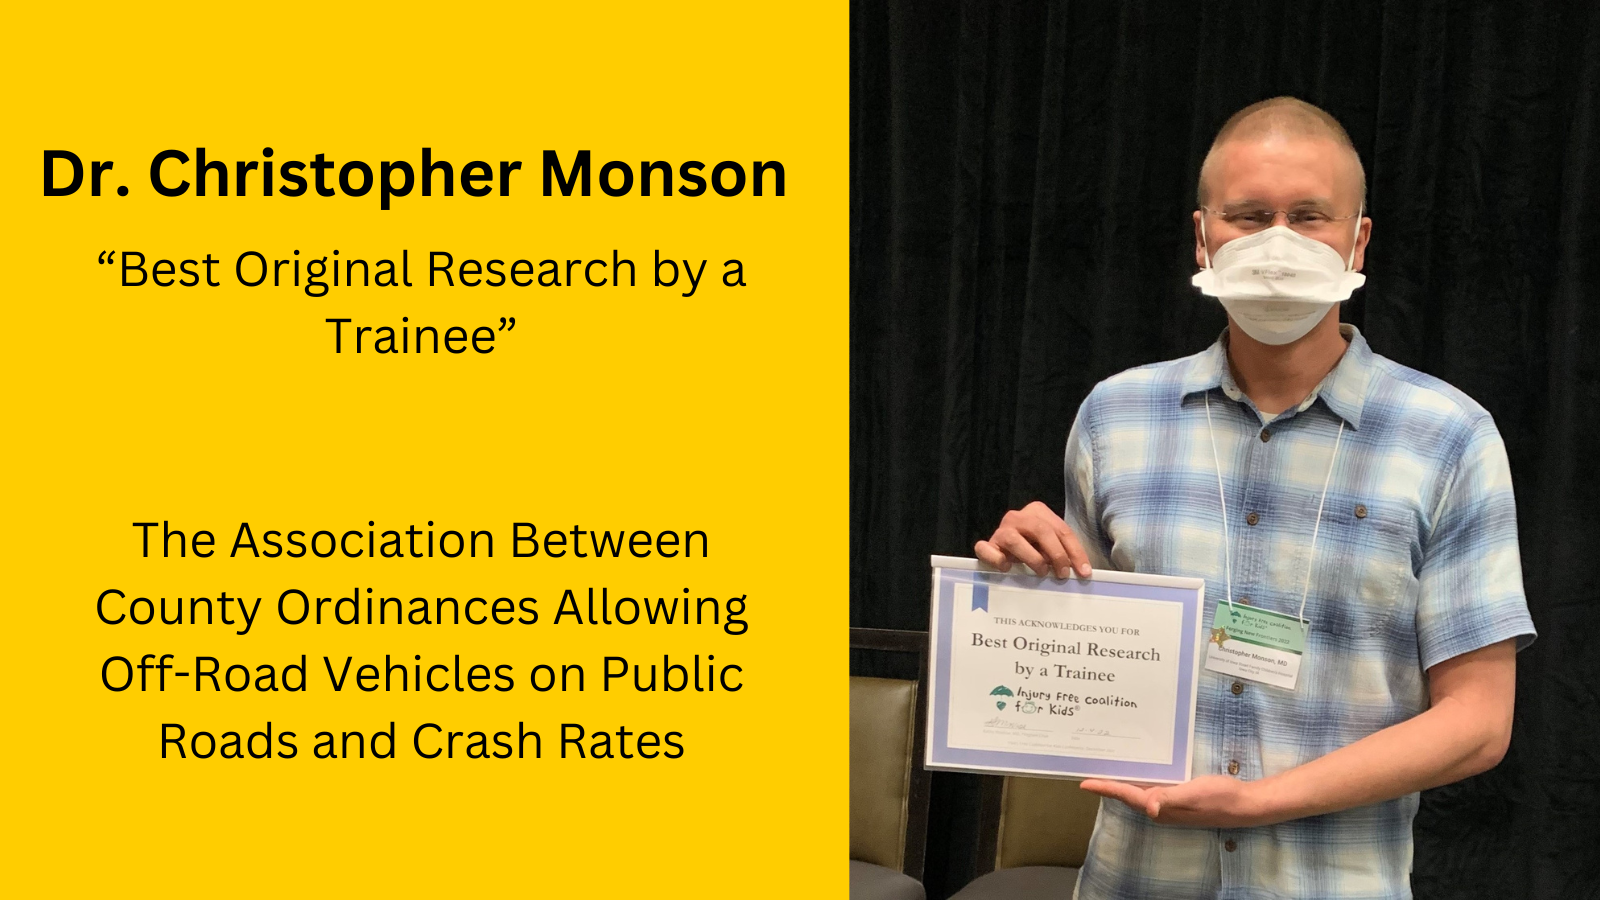 Dr. Christopher Monson of the UI Department of Pediatrics was awarded “Best Original Research by a Trainee” at the 2022 Injury Free Coalition for Kids conference for his UI IPRC pilot research project: The Association Between County Ordinances Allowing Off-Road Vehicles on Public Roads and Crash Rates. 